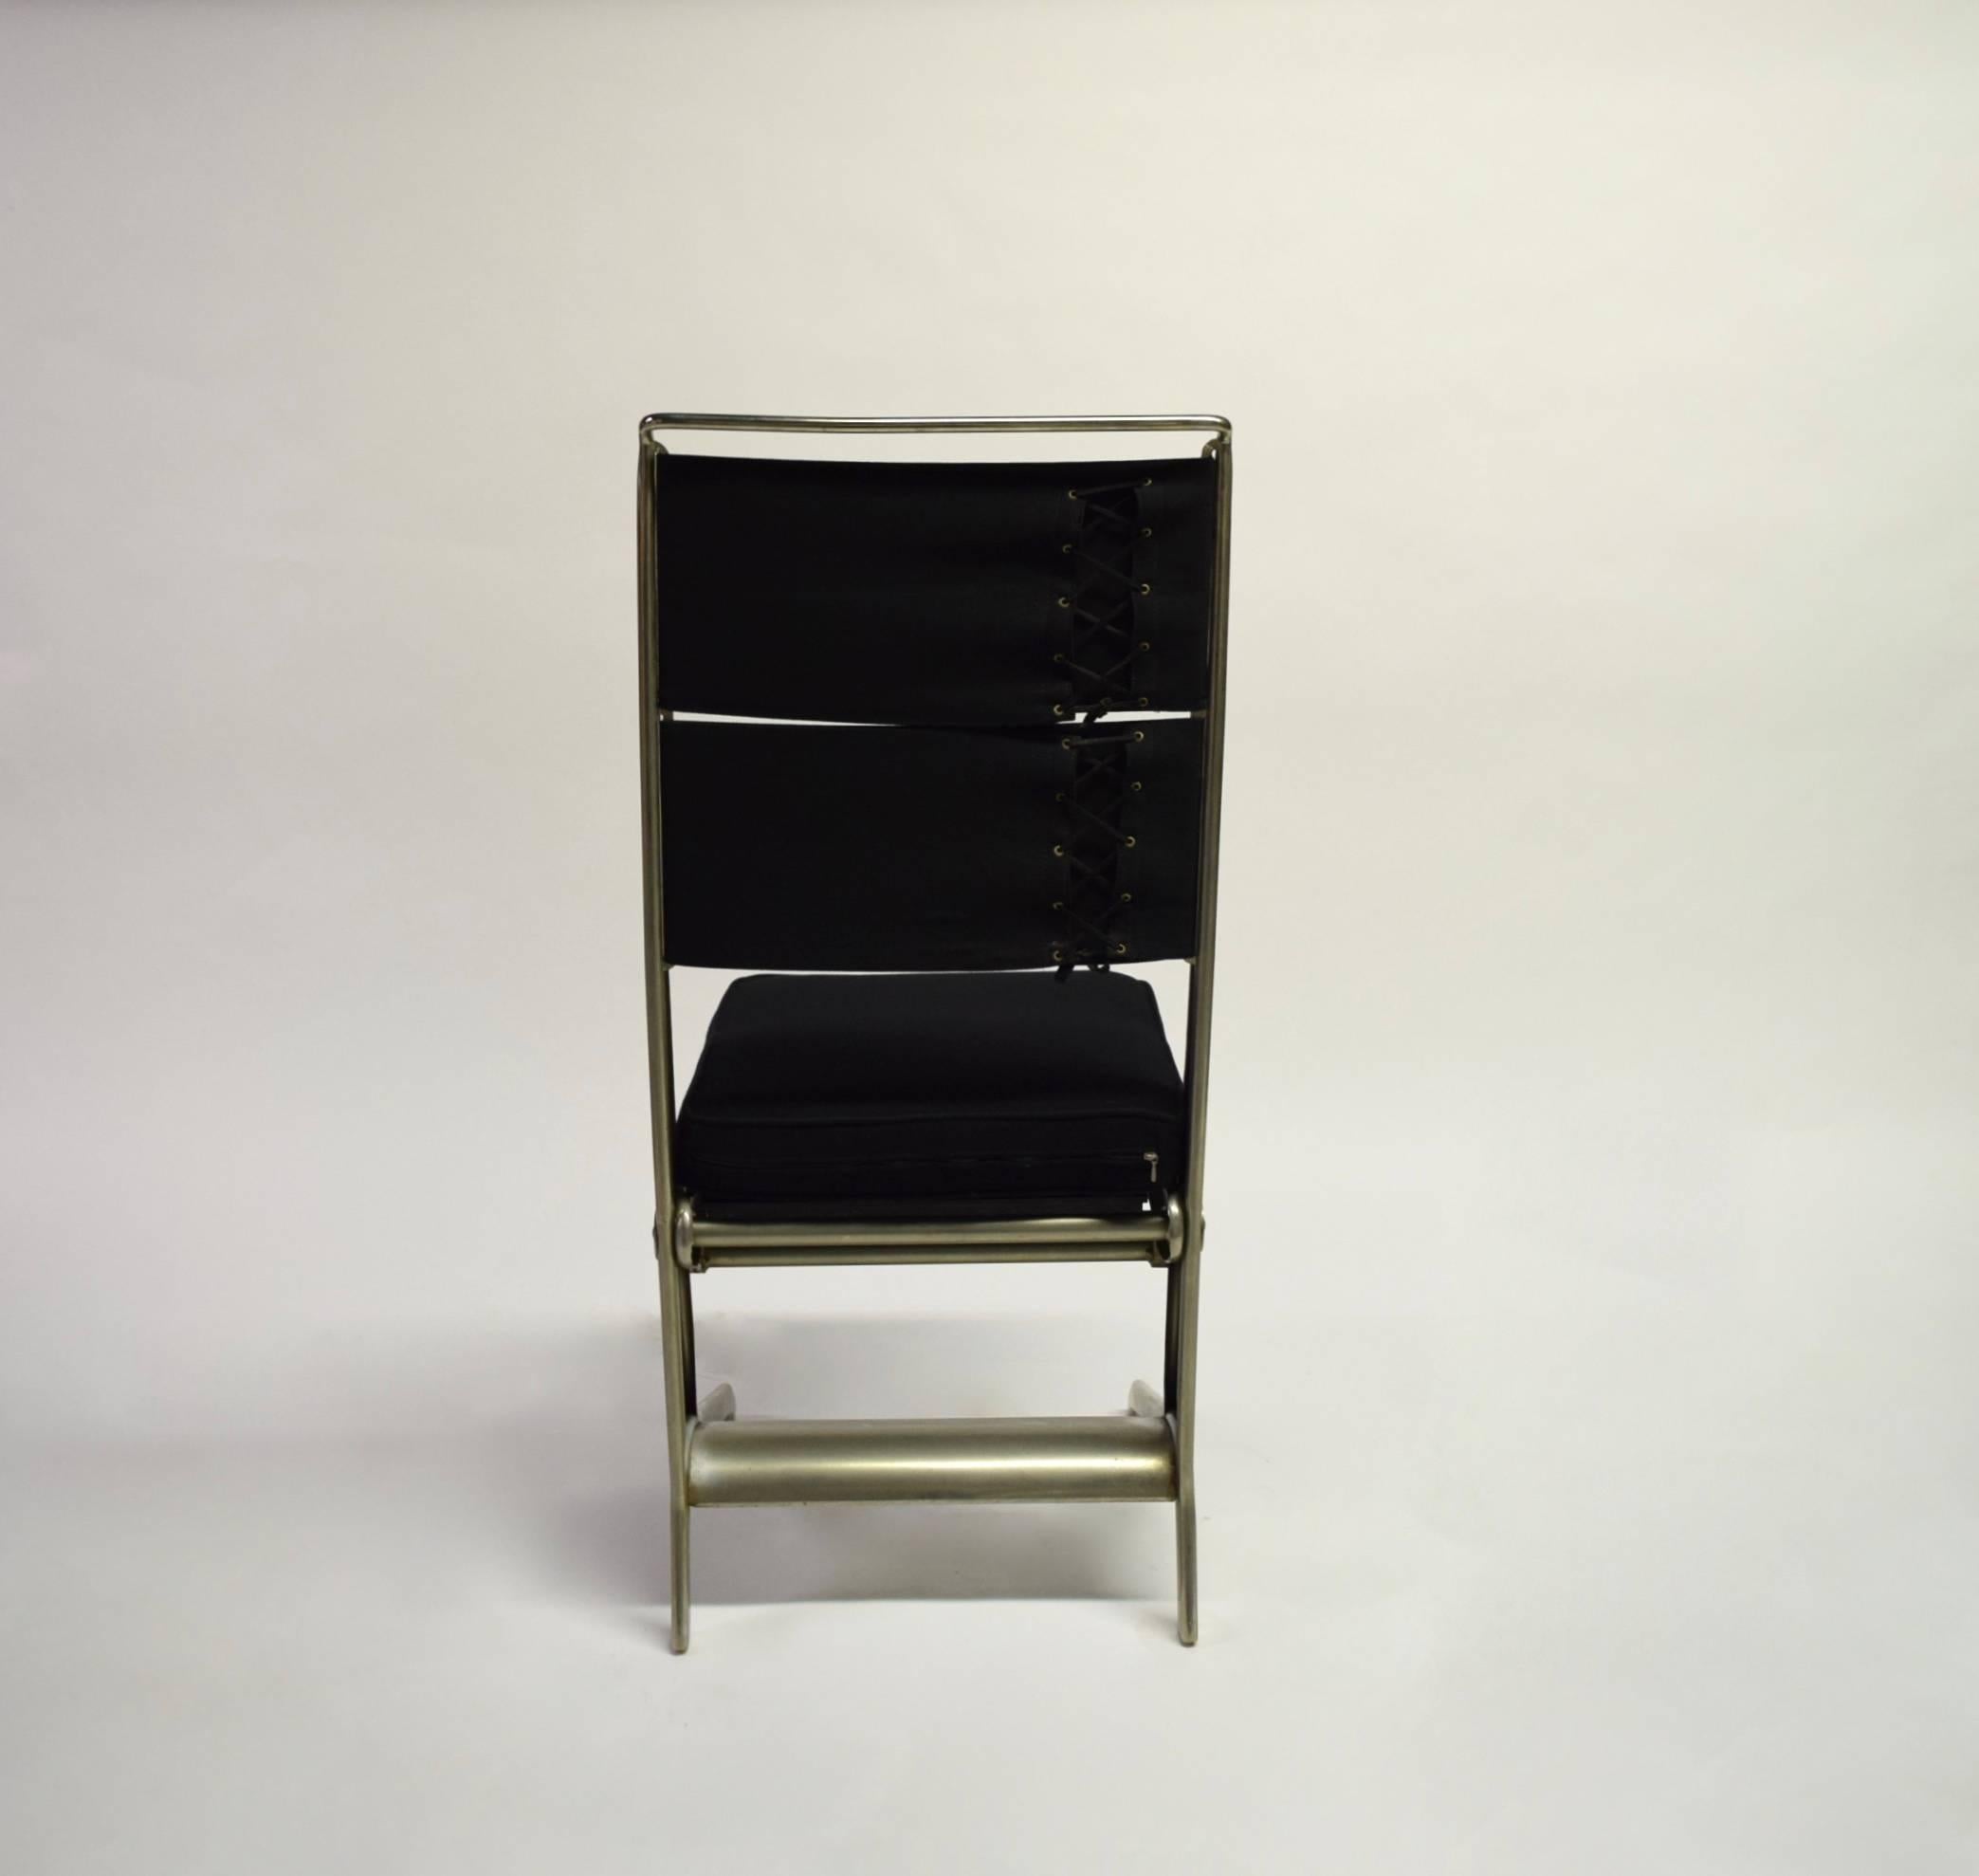 French Pair of Jean Prouvé Folding Chairs Designed 1930, Manufactured by Tecta 1983